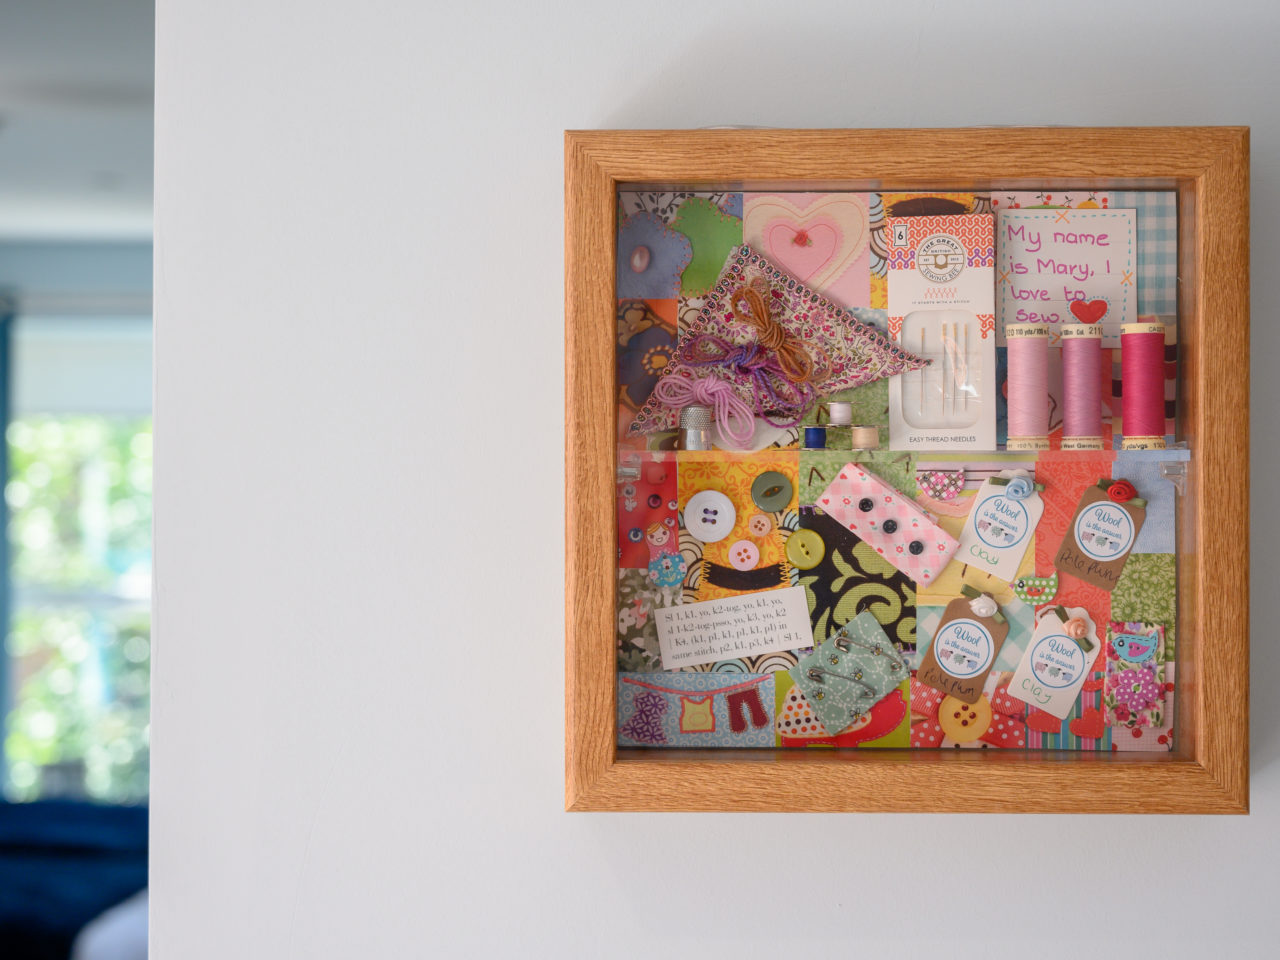 One of the memory boxes Bowbrook staff design to help residents find their rooms and living spaces at Bowbrook, a dementia specialist care home in Lichfield